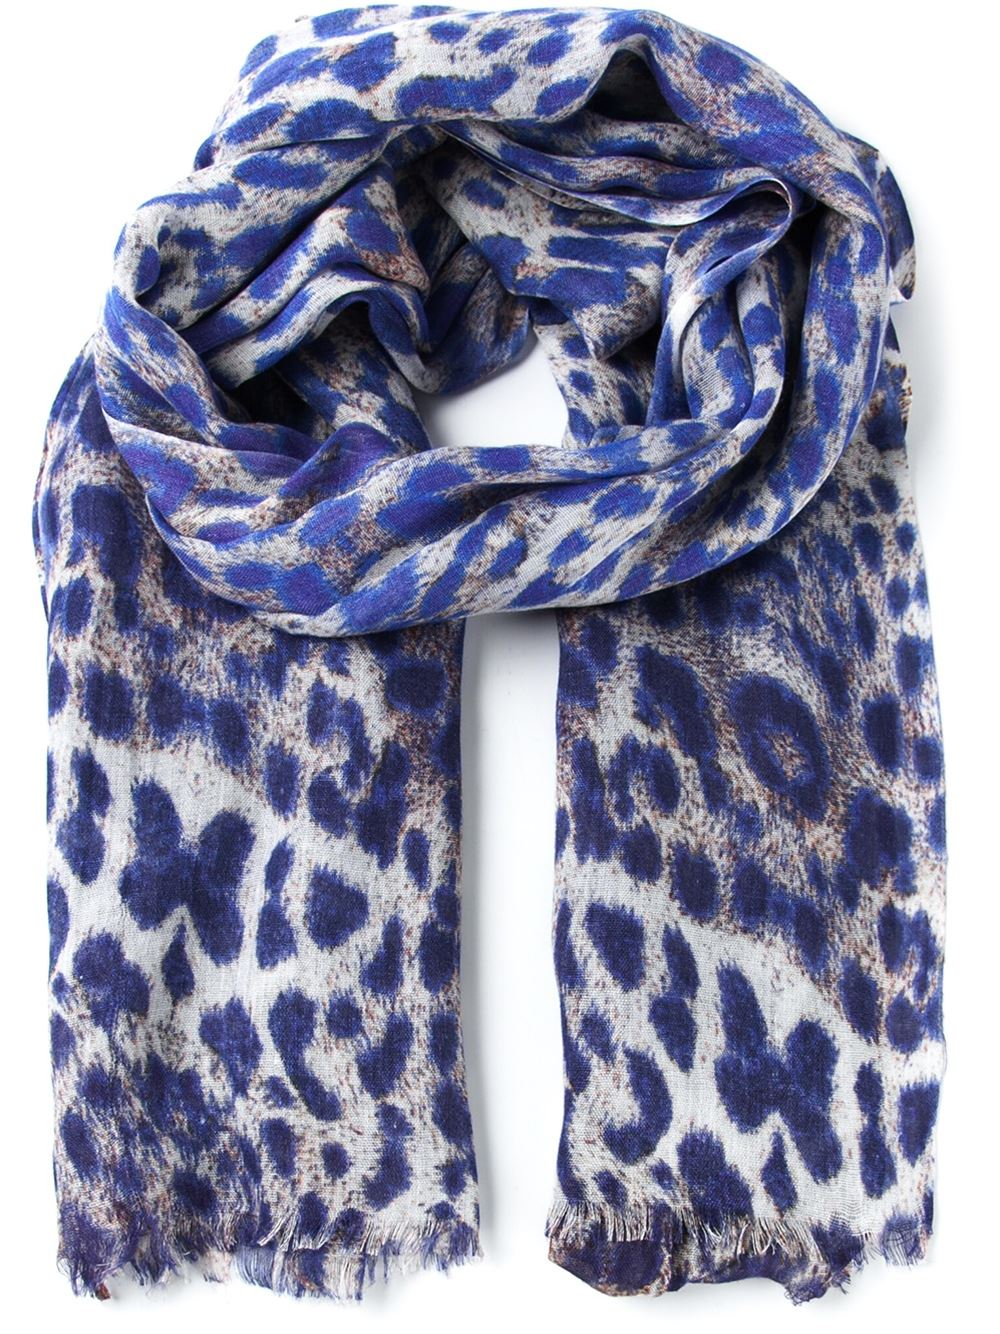 Lyst - Lily And Lionel 'Eva' Leopard Print Scarf in Blue